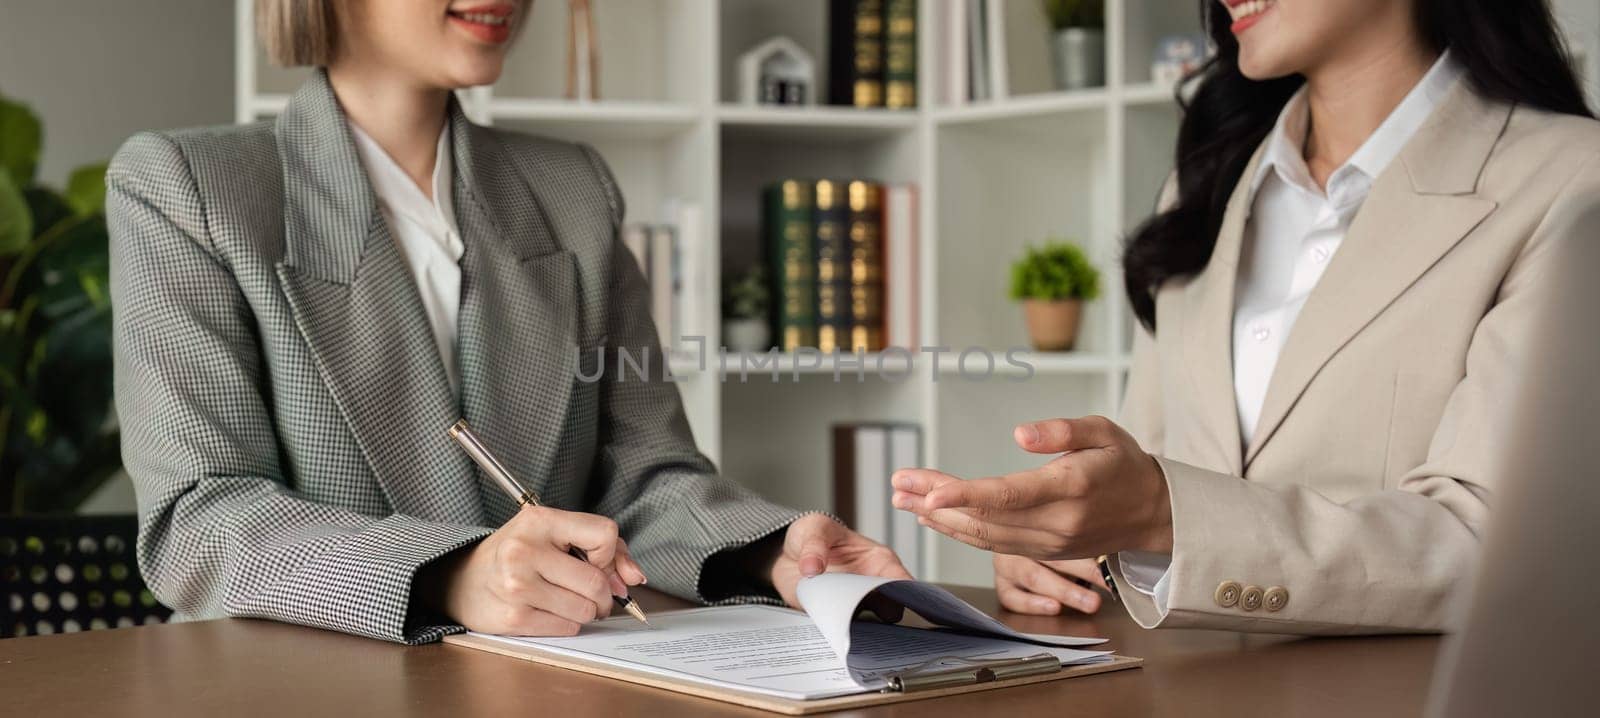 Lawyer and businesswomen discussing and introducing Providing legal advice regarding signing insurance contracts or financial contracts.